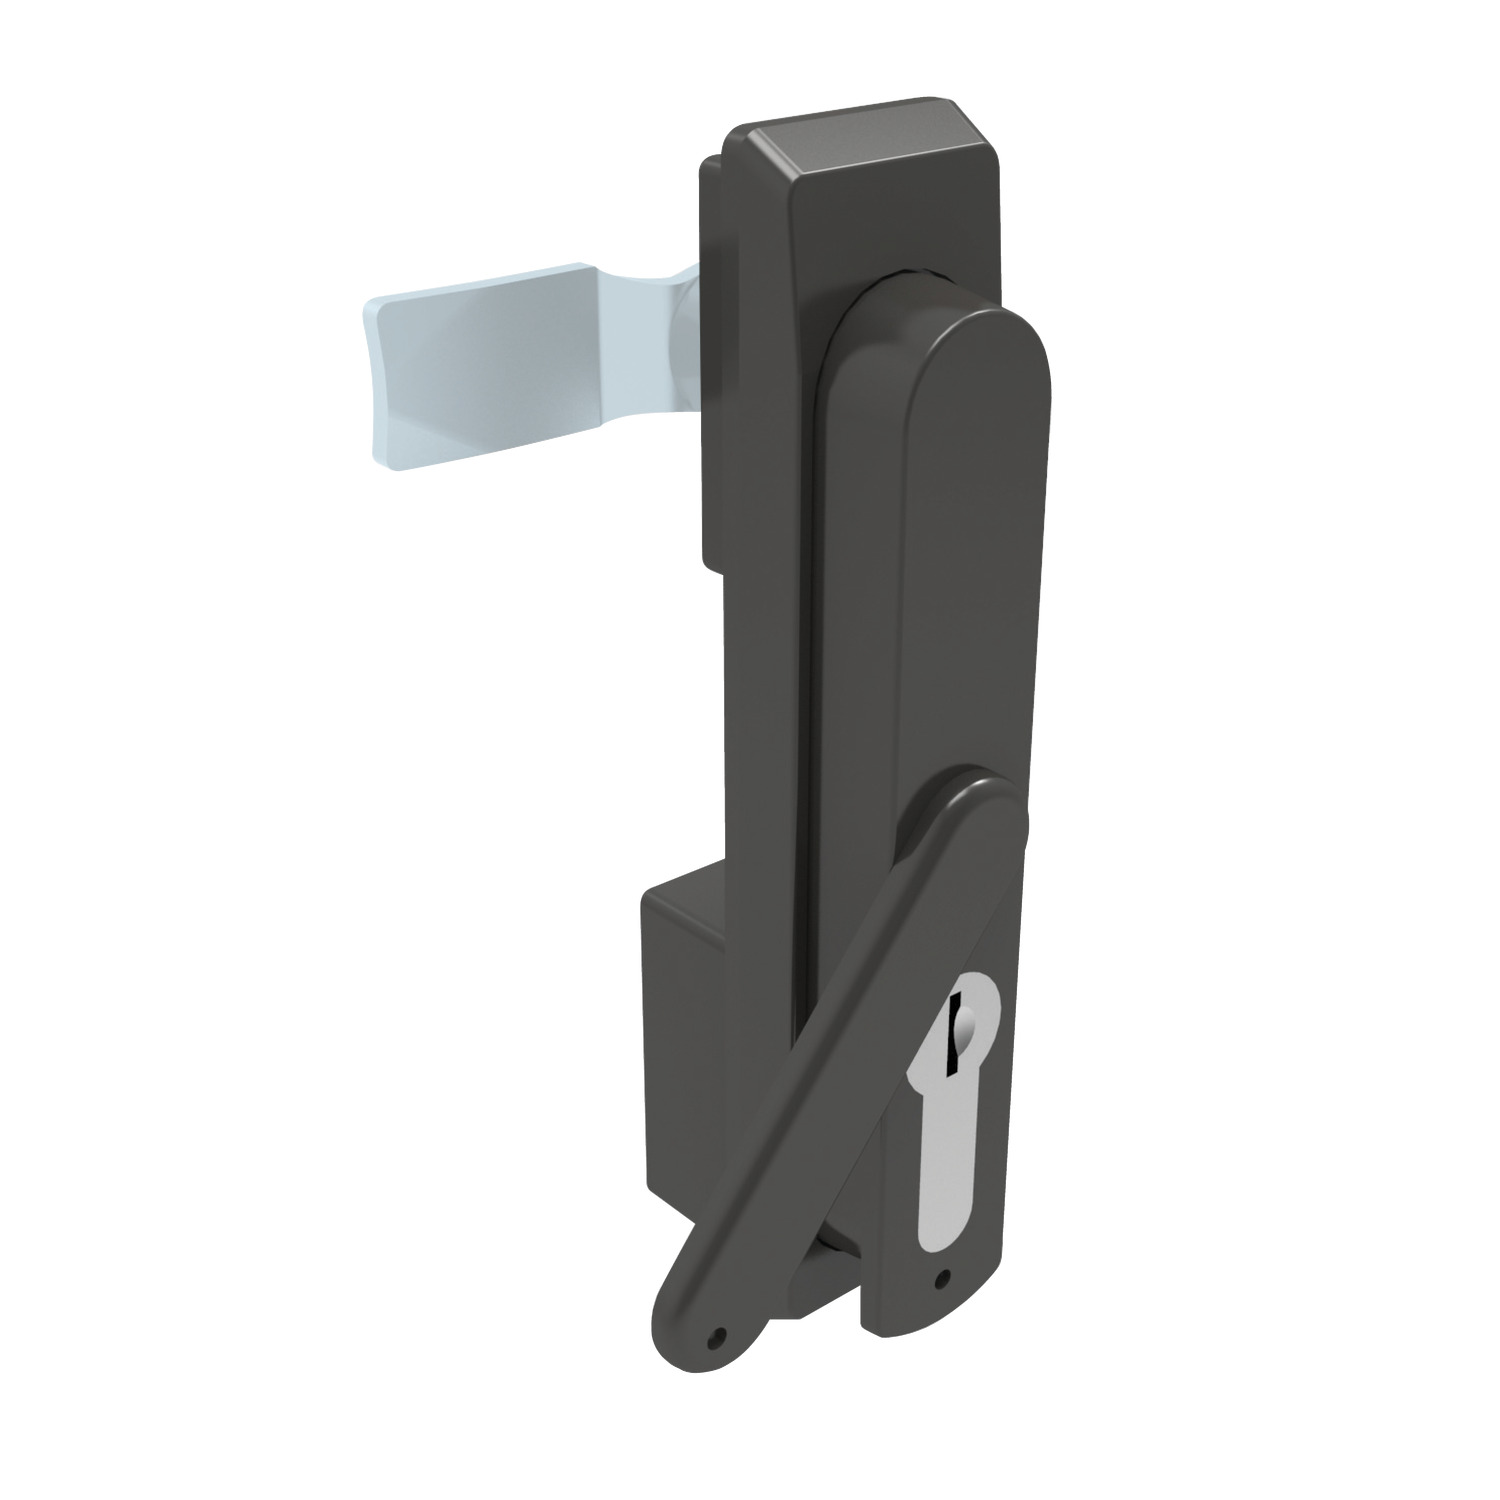 B1082.AW0010 Swing Handles with dust cover. Body and Handle Die Cast, black finish. 40 Euro Lock.